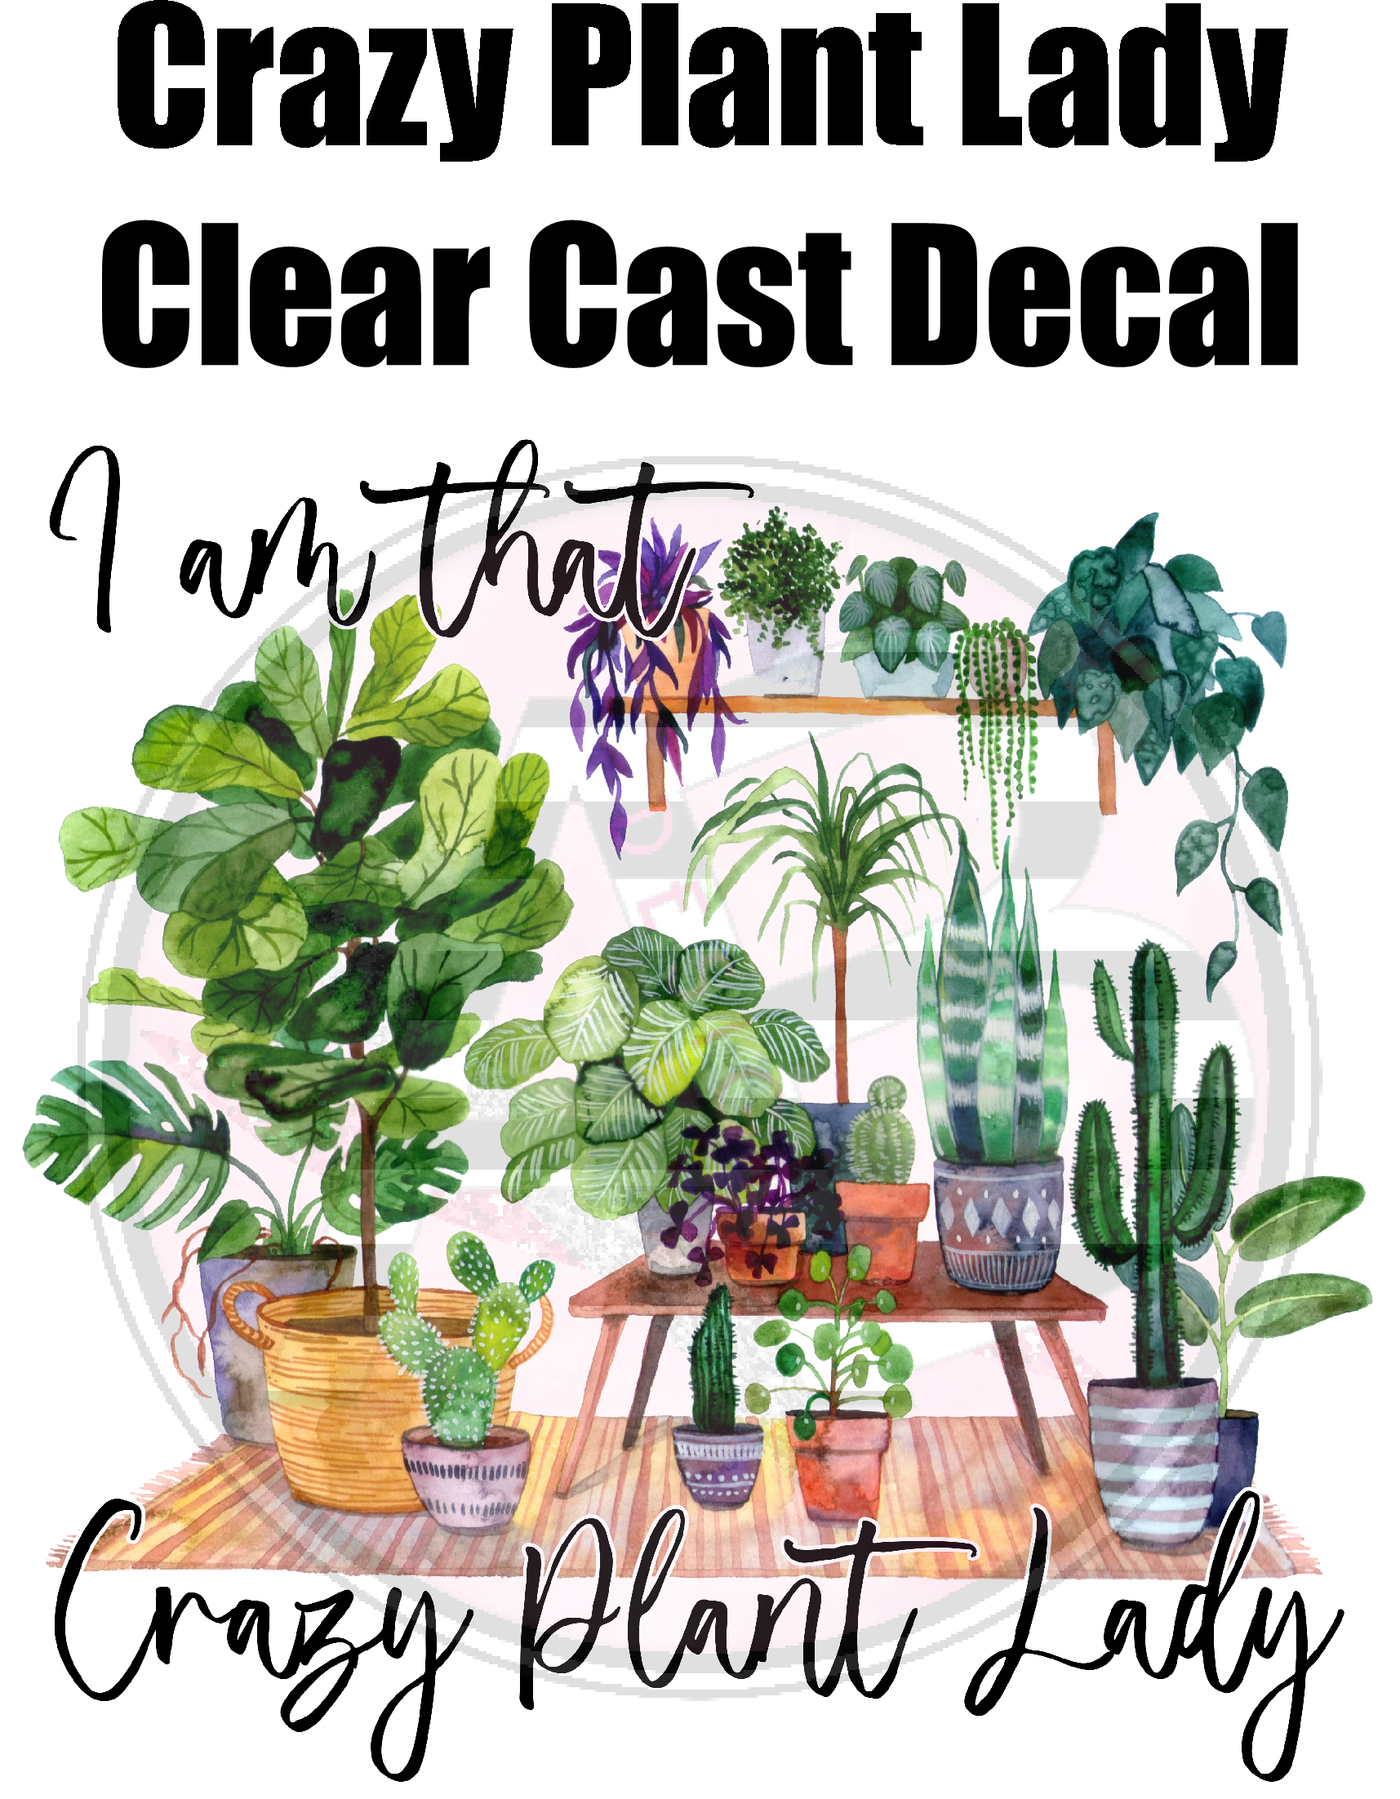 Crazy Plant Lady - Clear Cast Decal